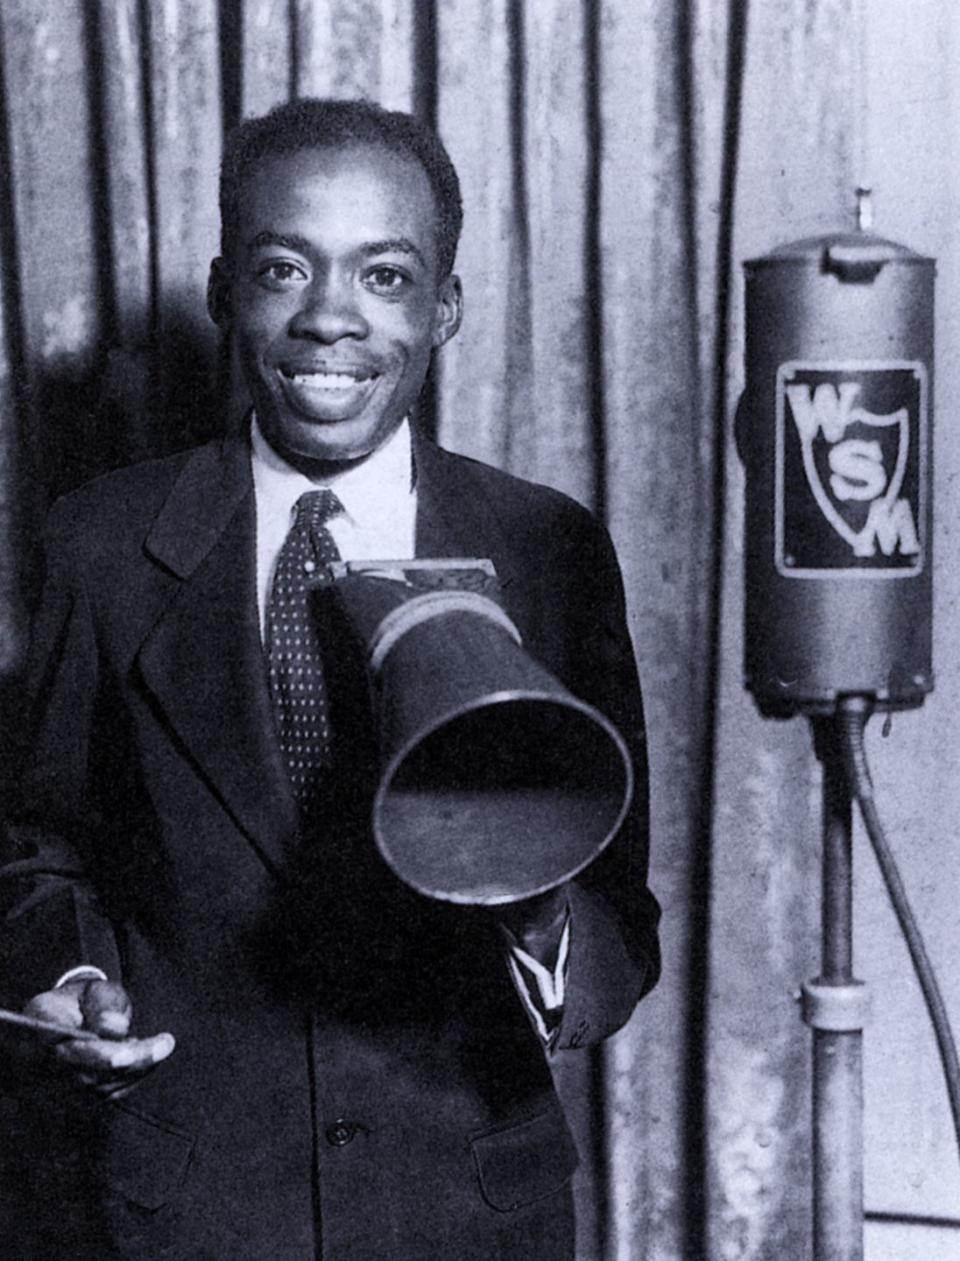 deford bailey smiling and holding a megaphone in a photograph